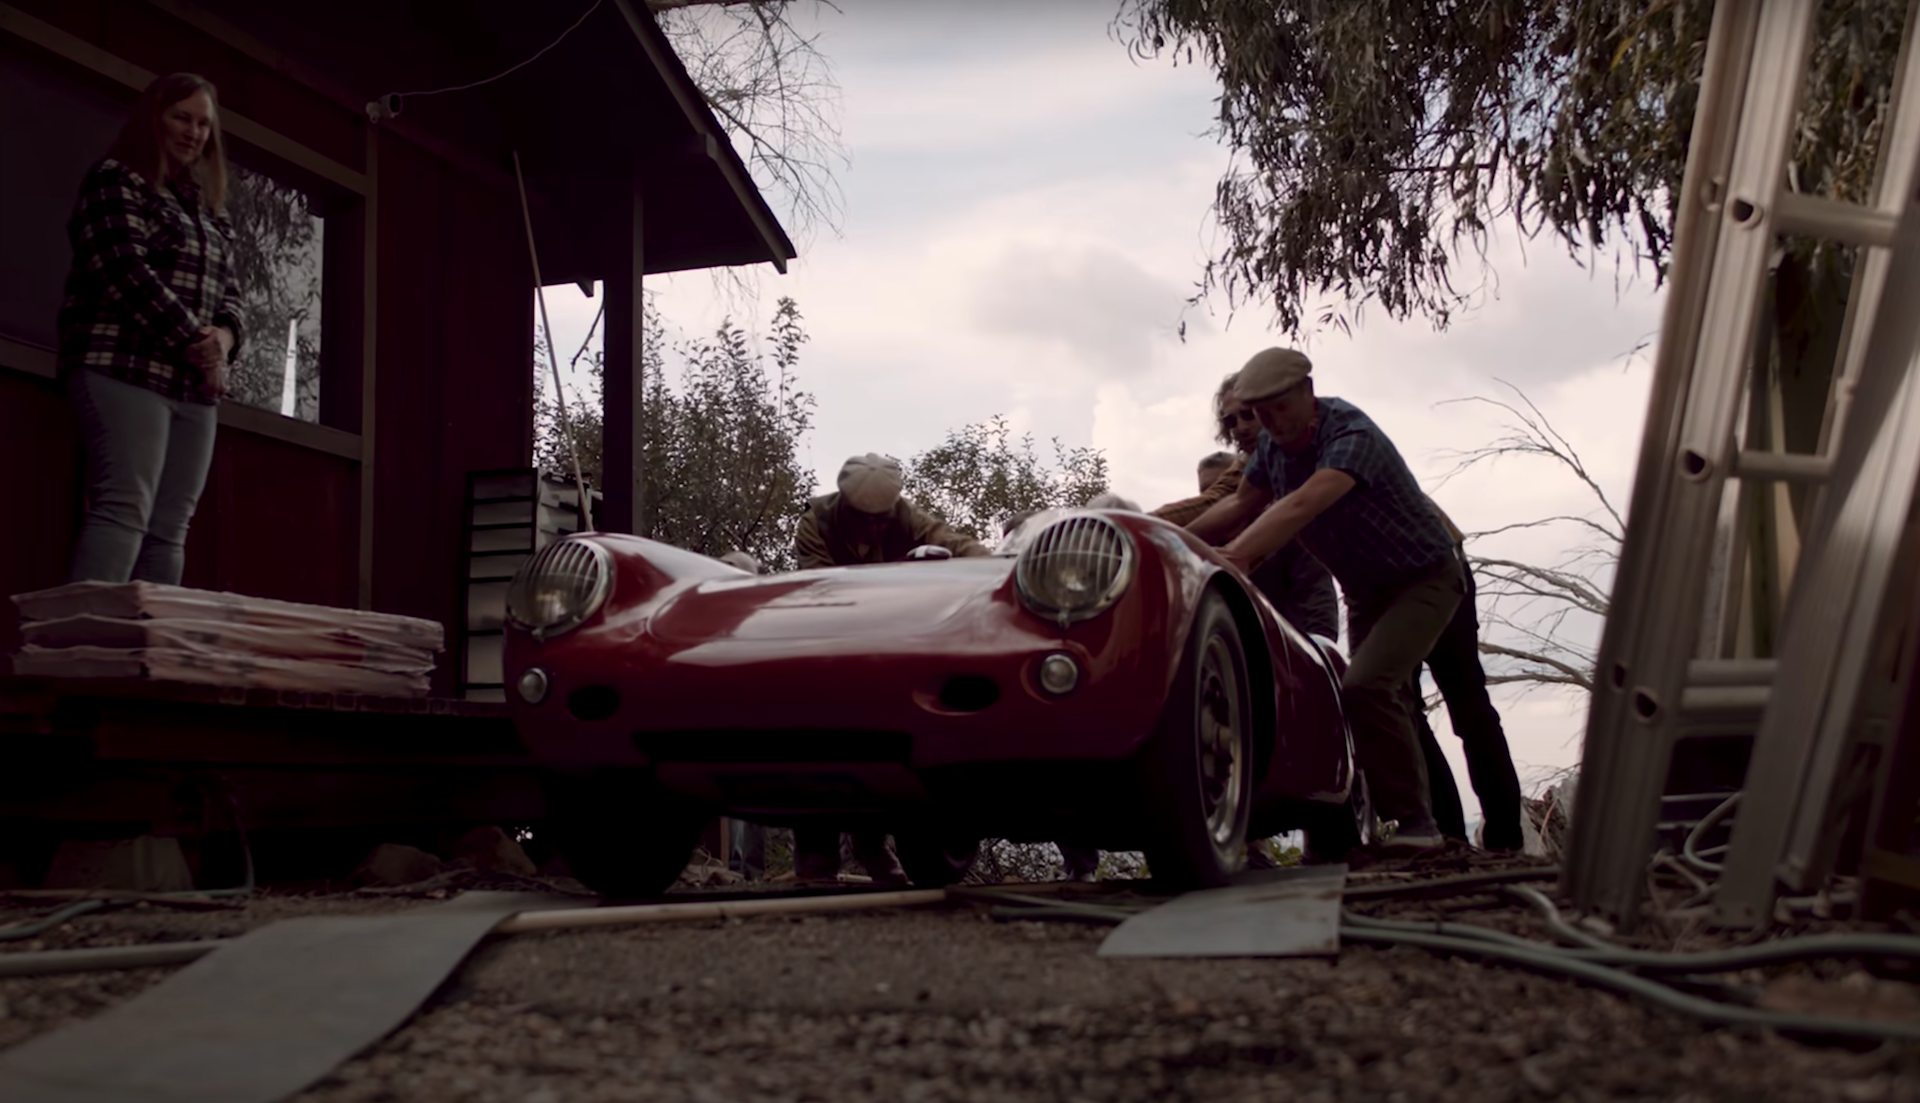 An image of a Porsche 550 Spyder that was found in a shipping container.